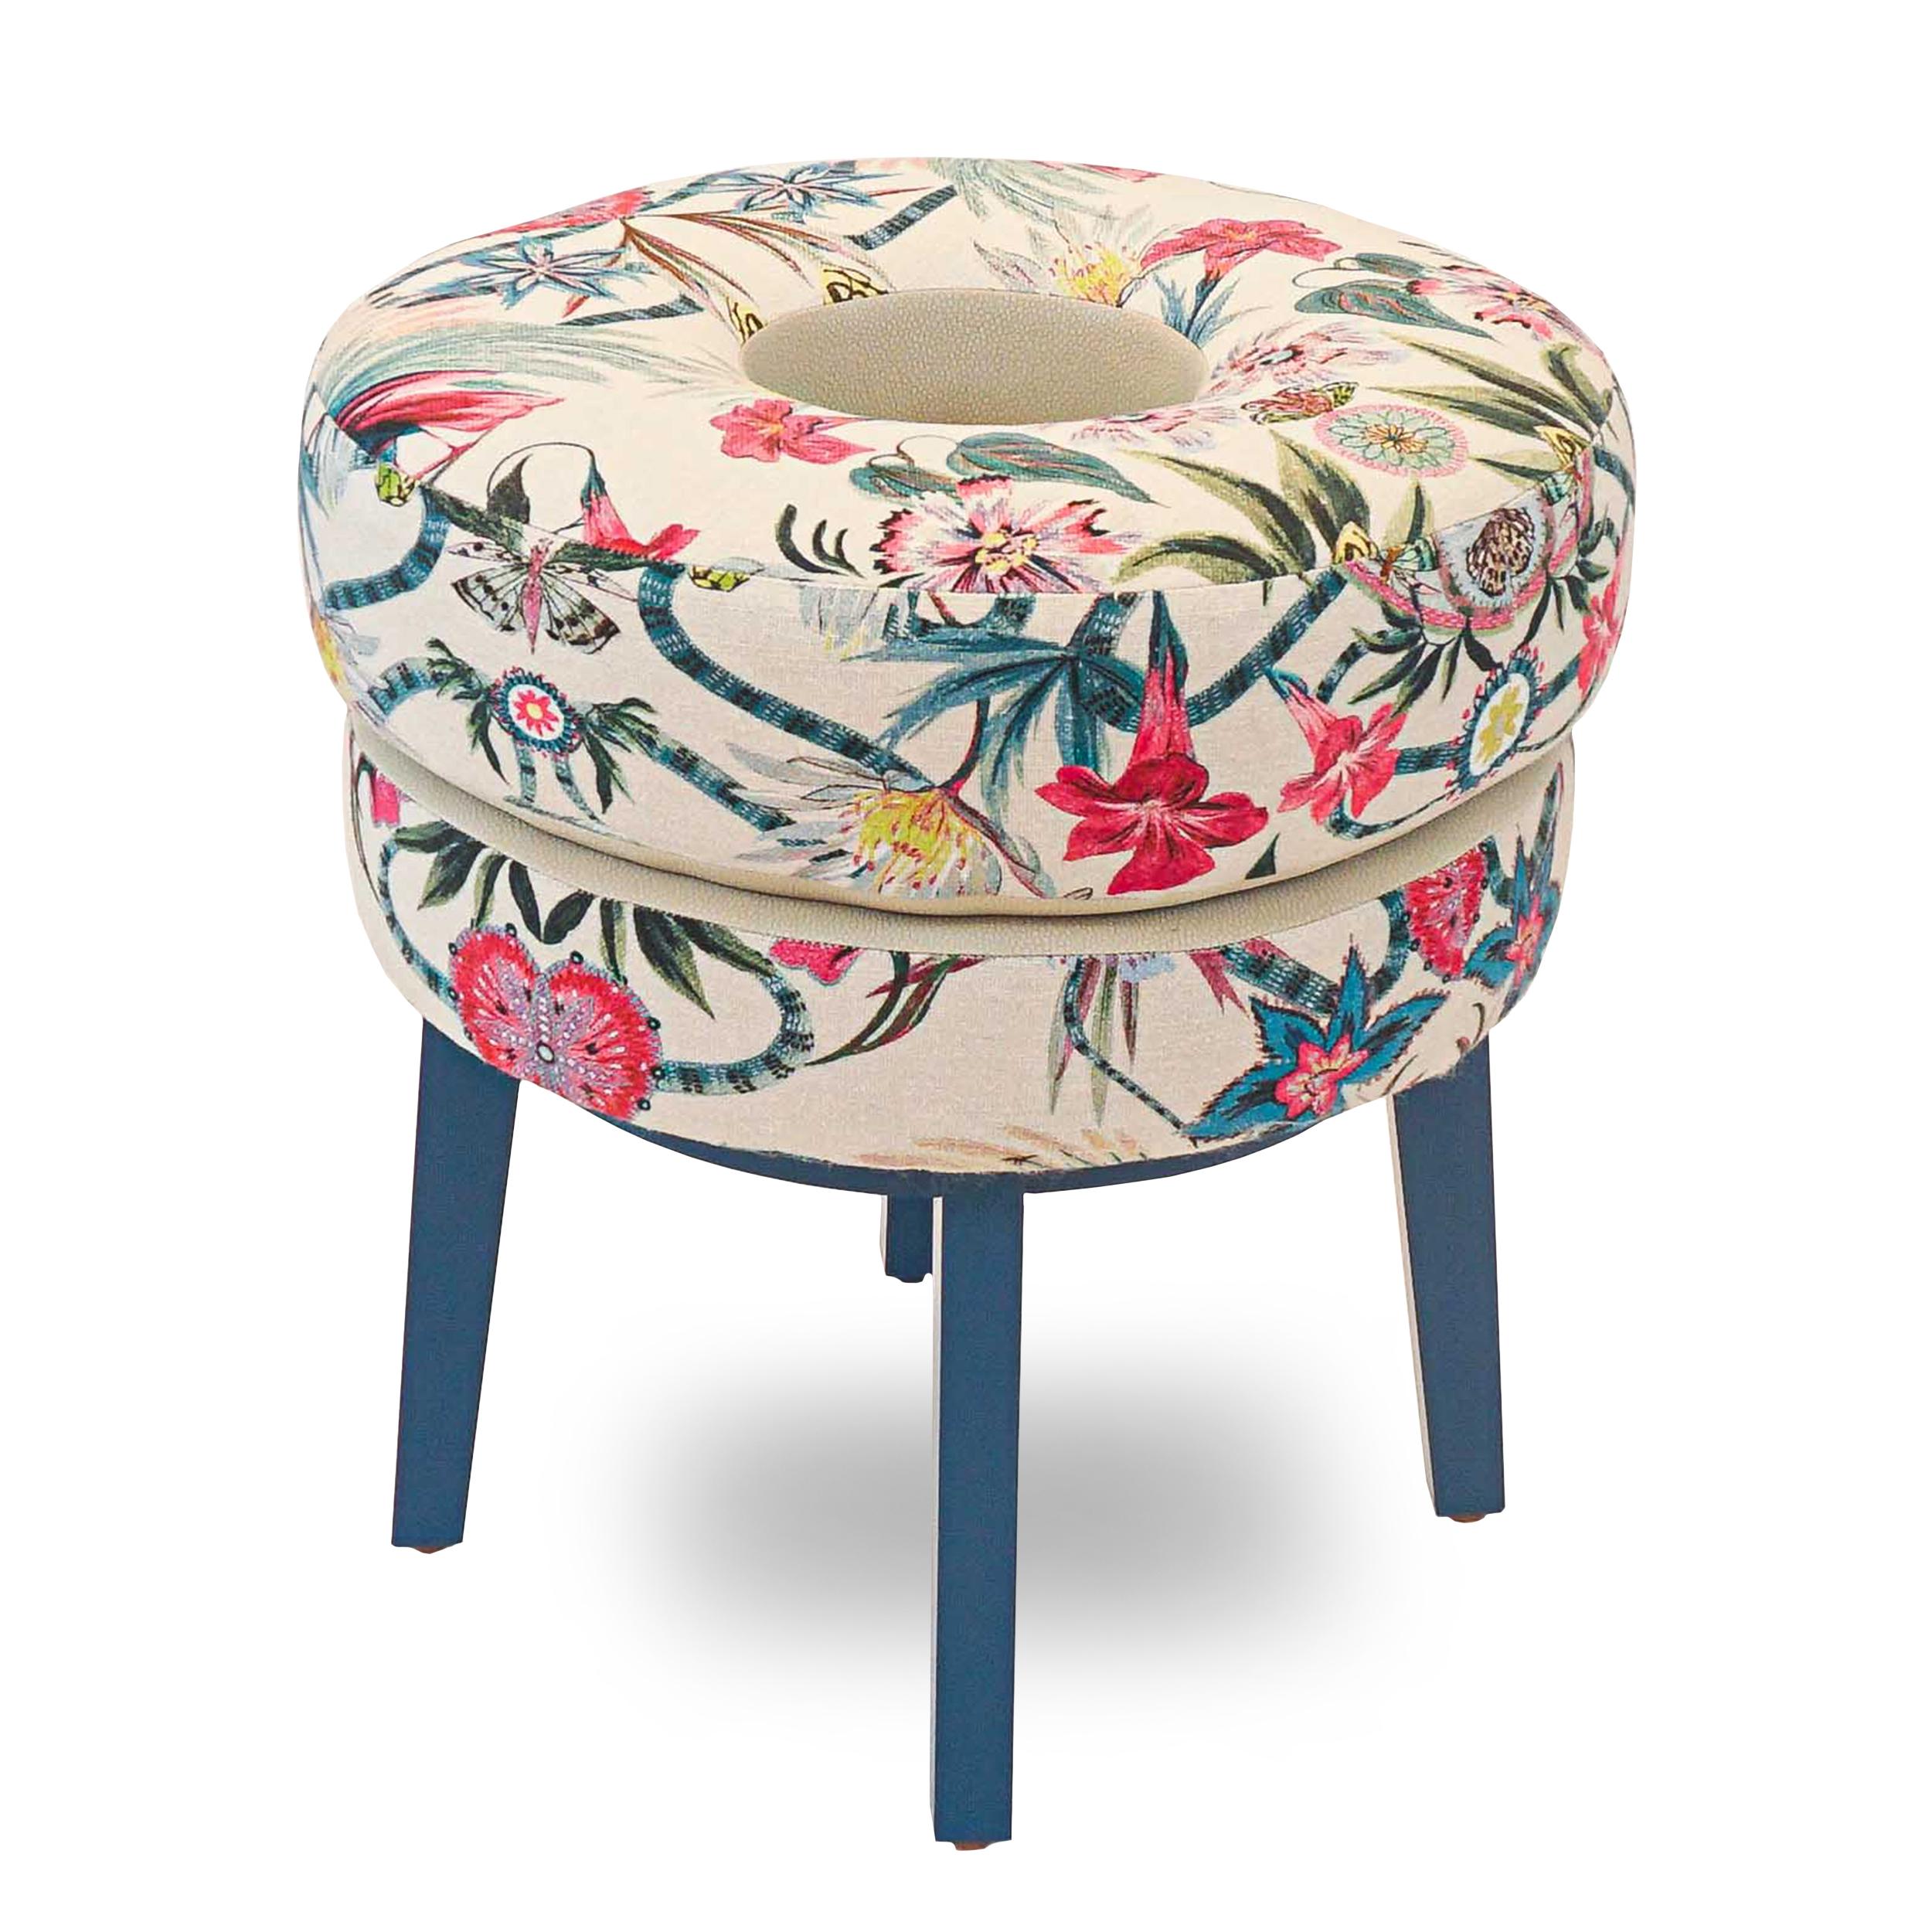 Modern Floral Print Small Round Stool For Sale